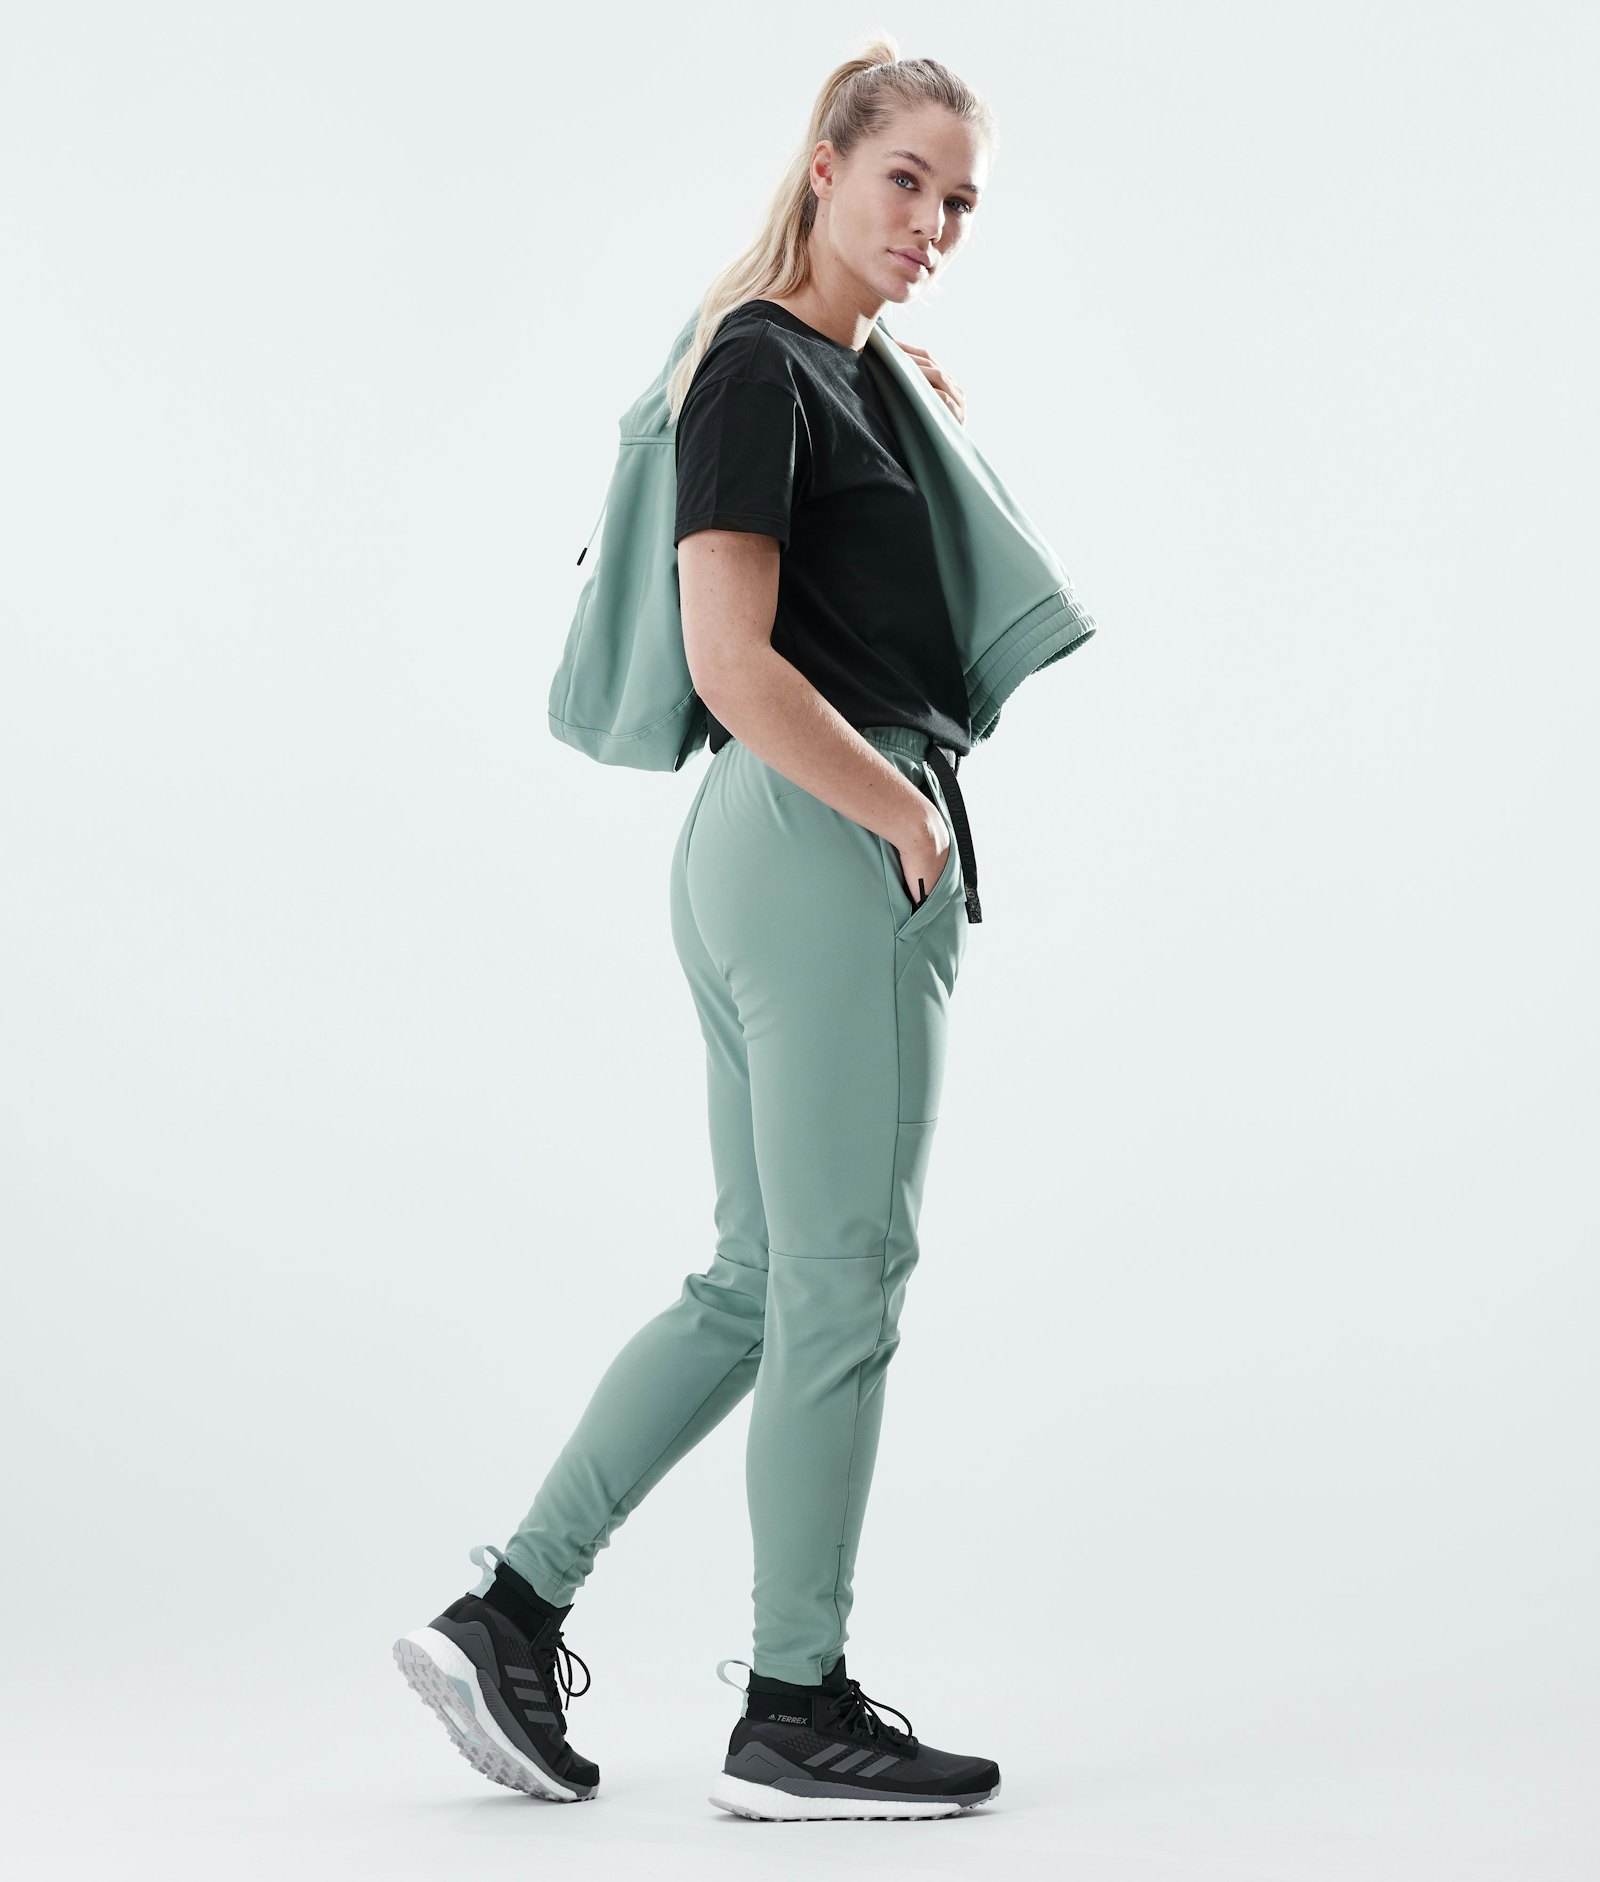 Nomad W 2021 Outdoor Pants Women Faded Green